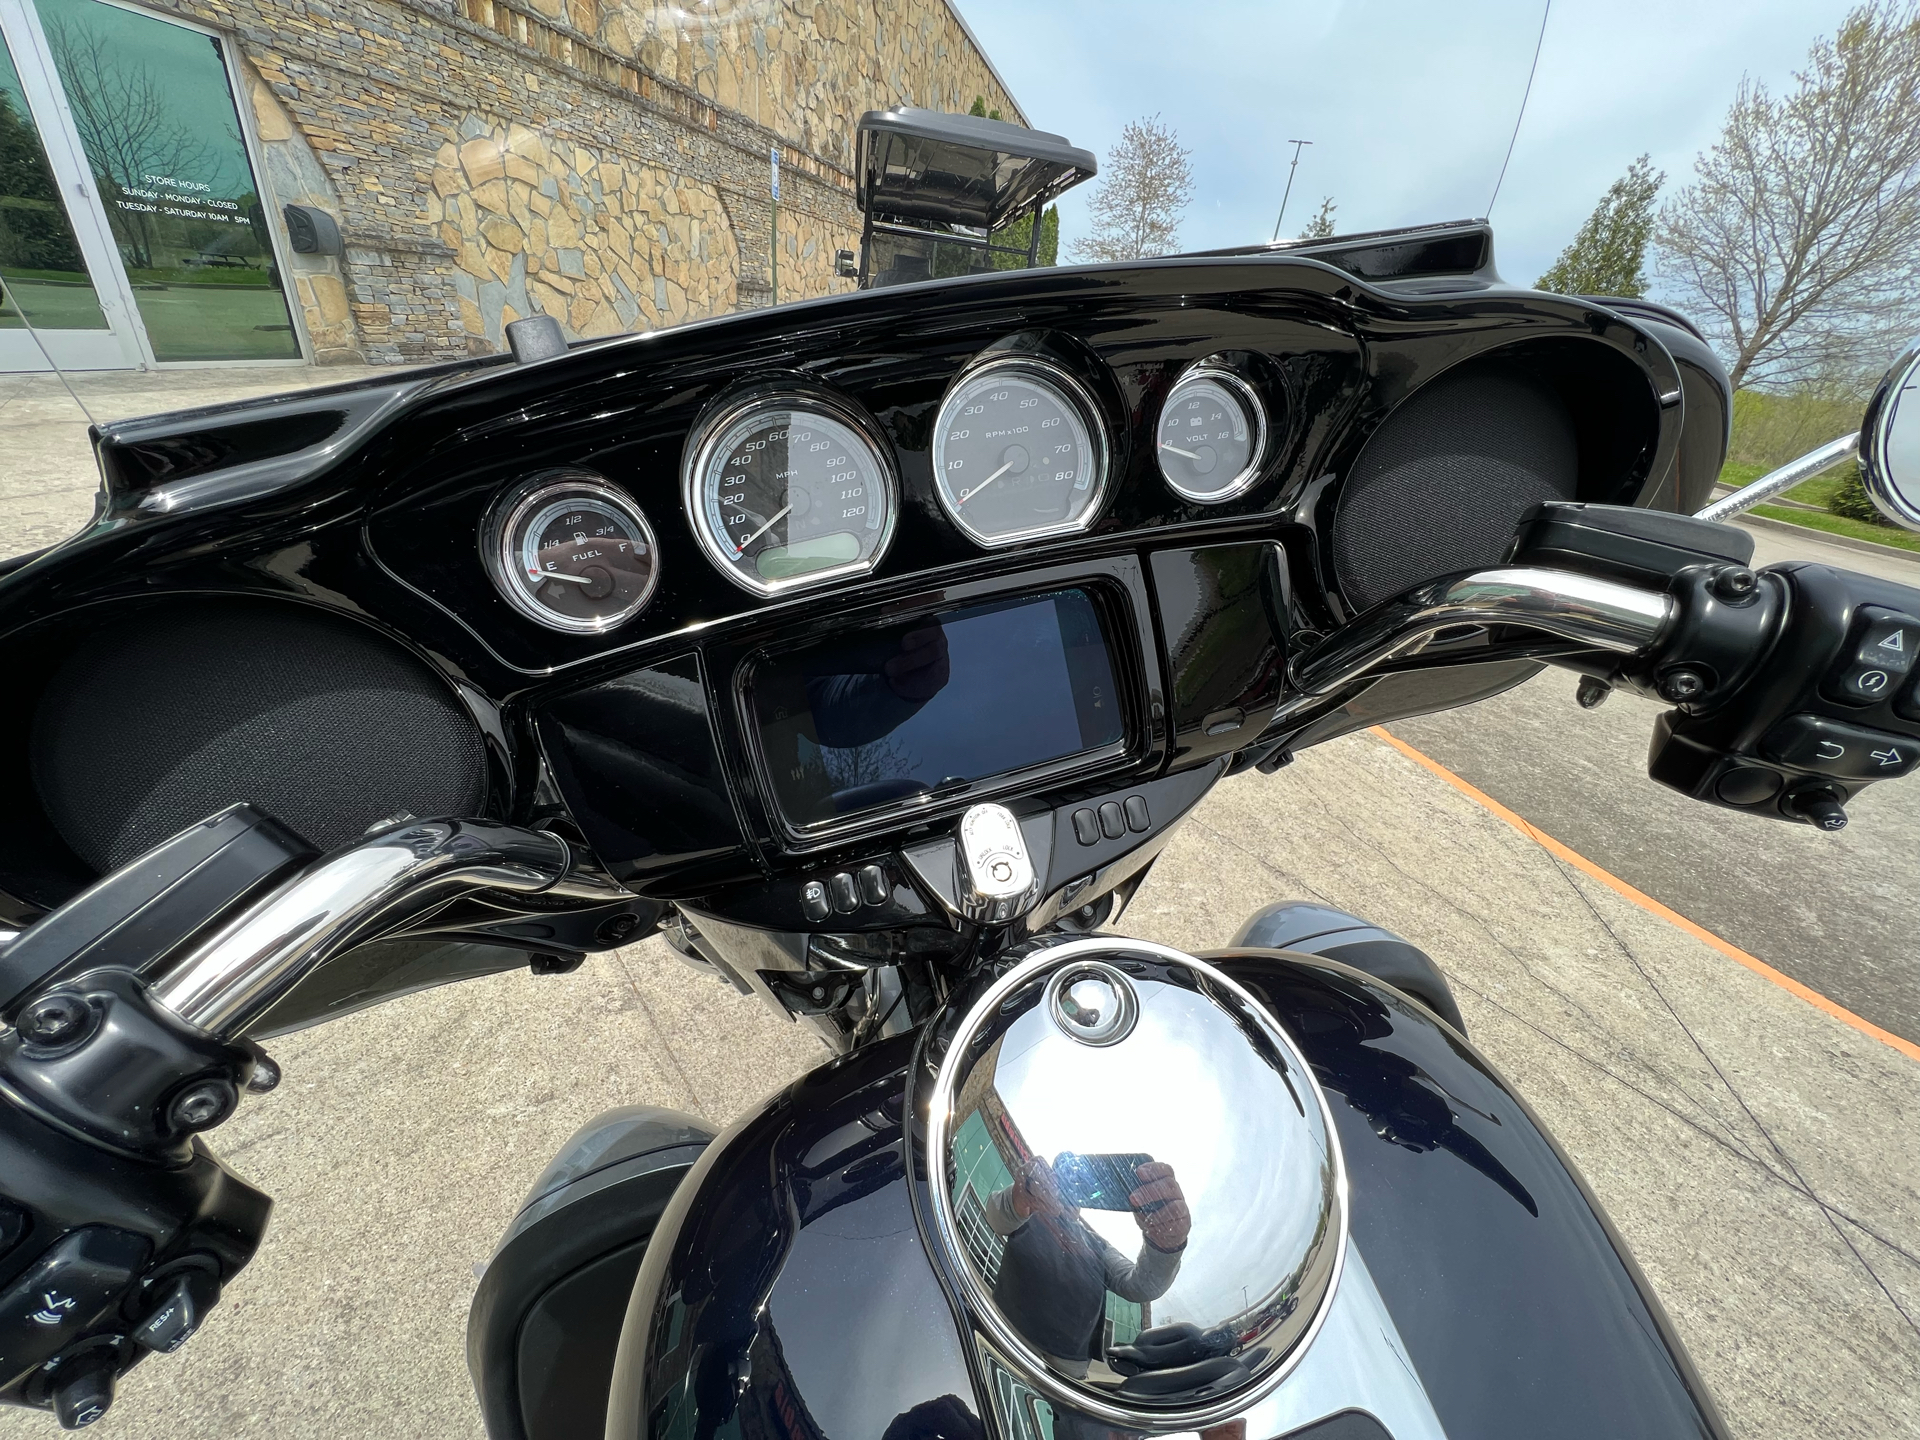 2019 Harley-Davidson FLHTK Ultra Limited in Columbia, Tennessee - Photo 4